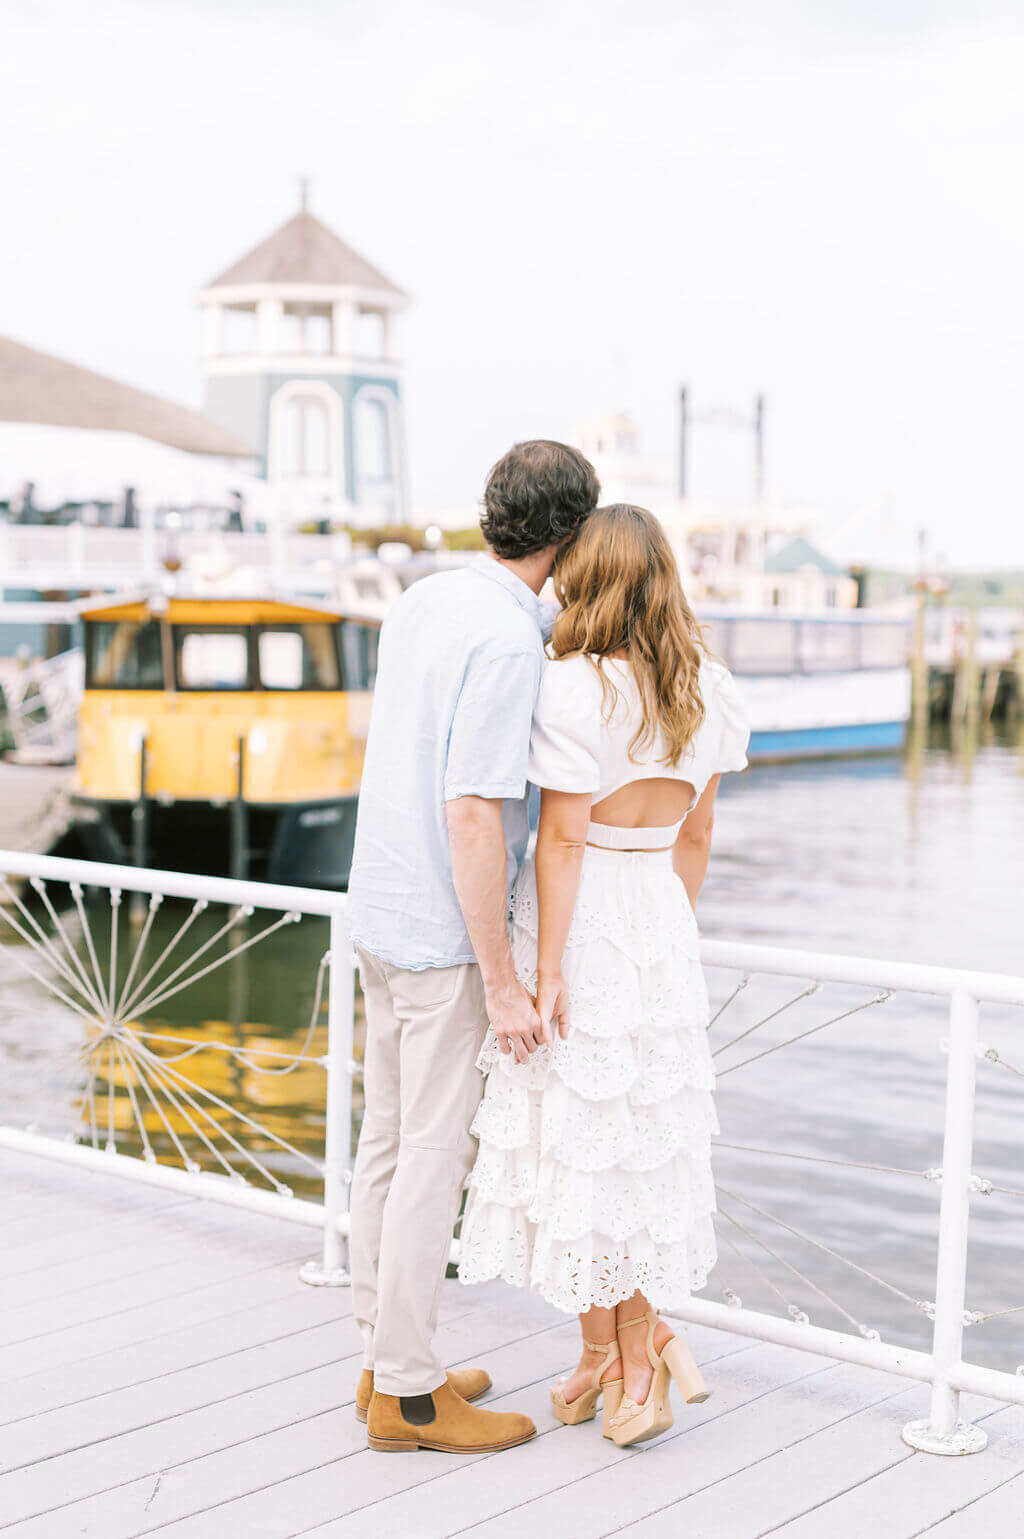 Couple looking out over a river in old town Alexandria during Engagement photos taken by Rachael Mattio Photography.